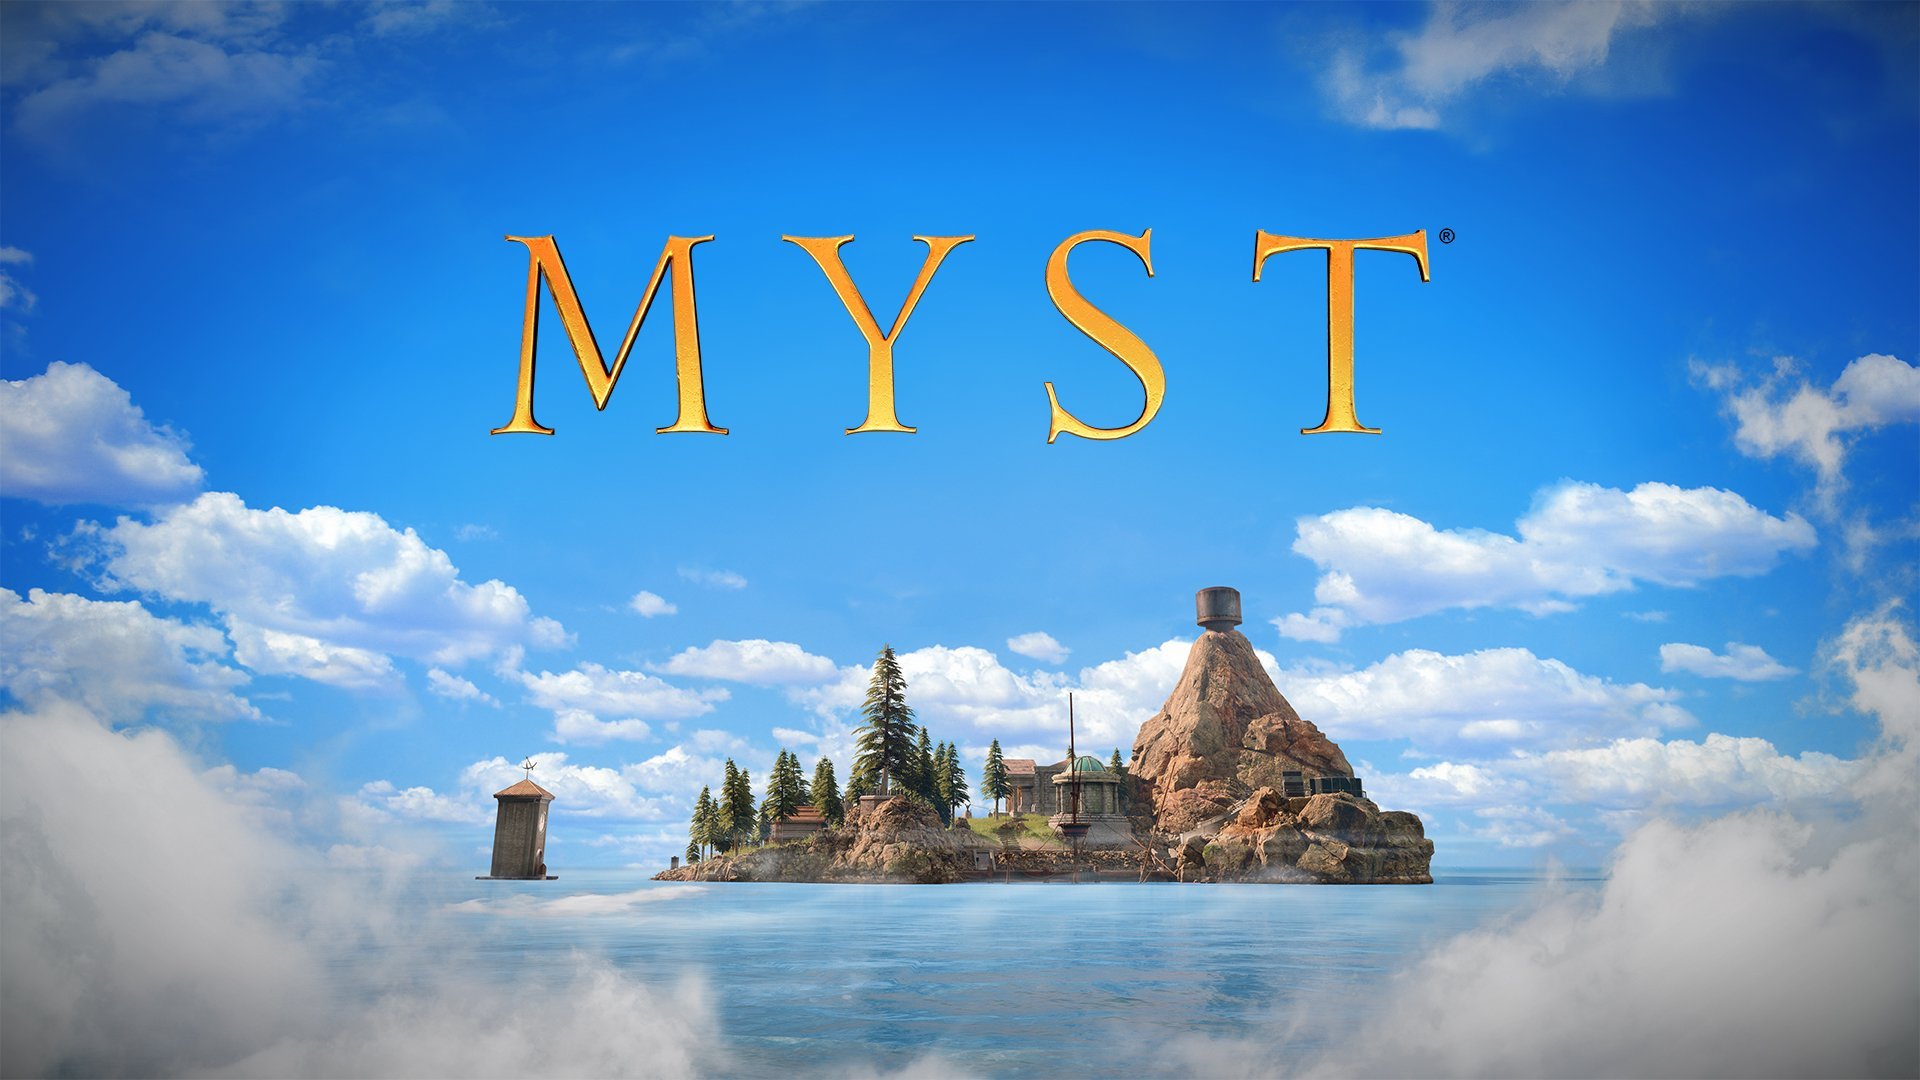 ‘Walkabout Mini Golf’ is Getting a Course Based on ‘MYST’ This Fall